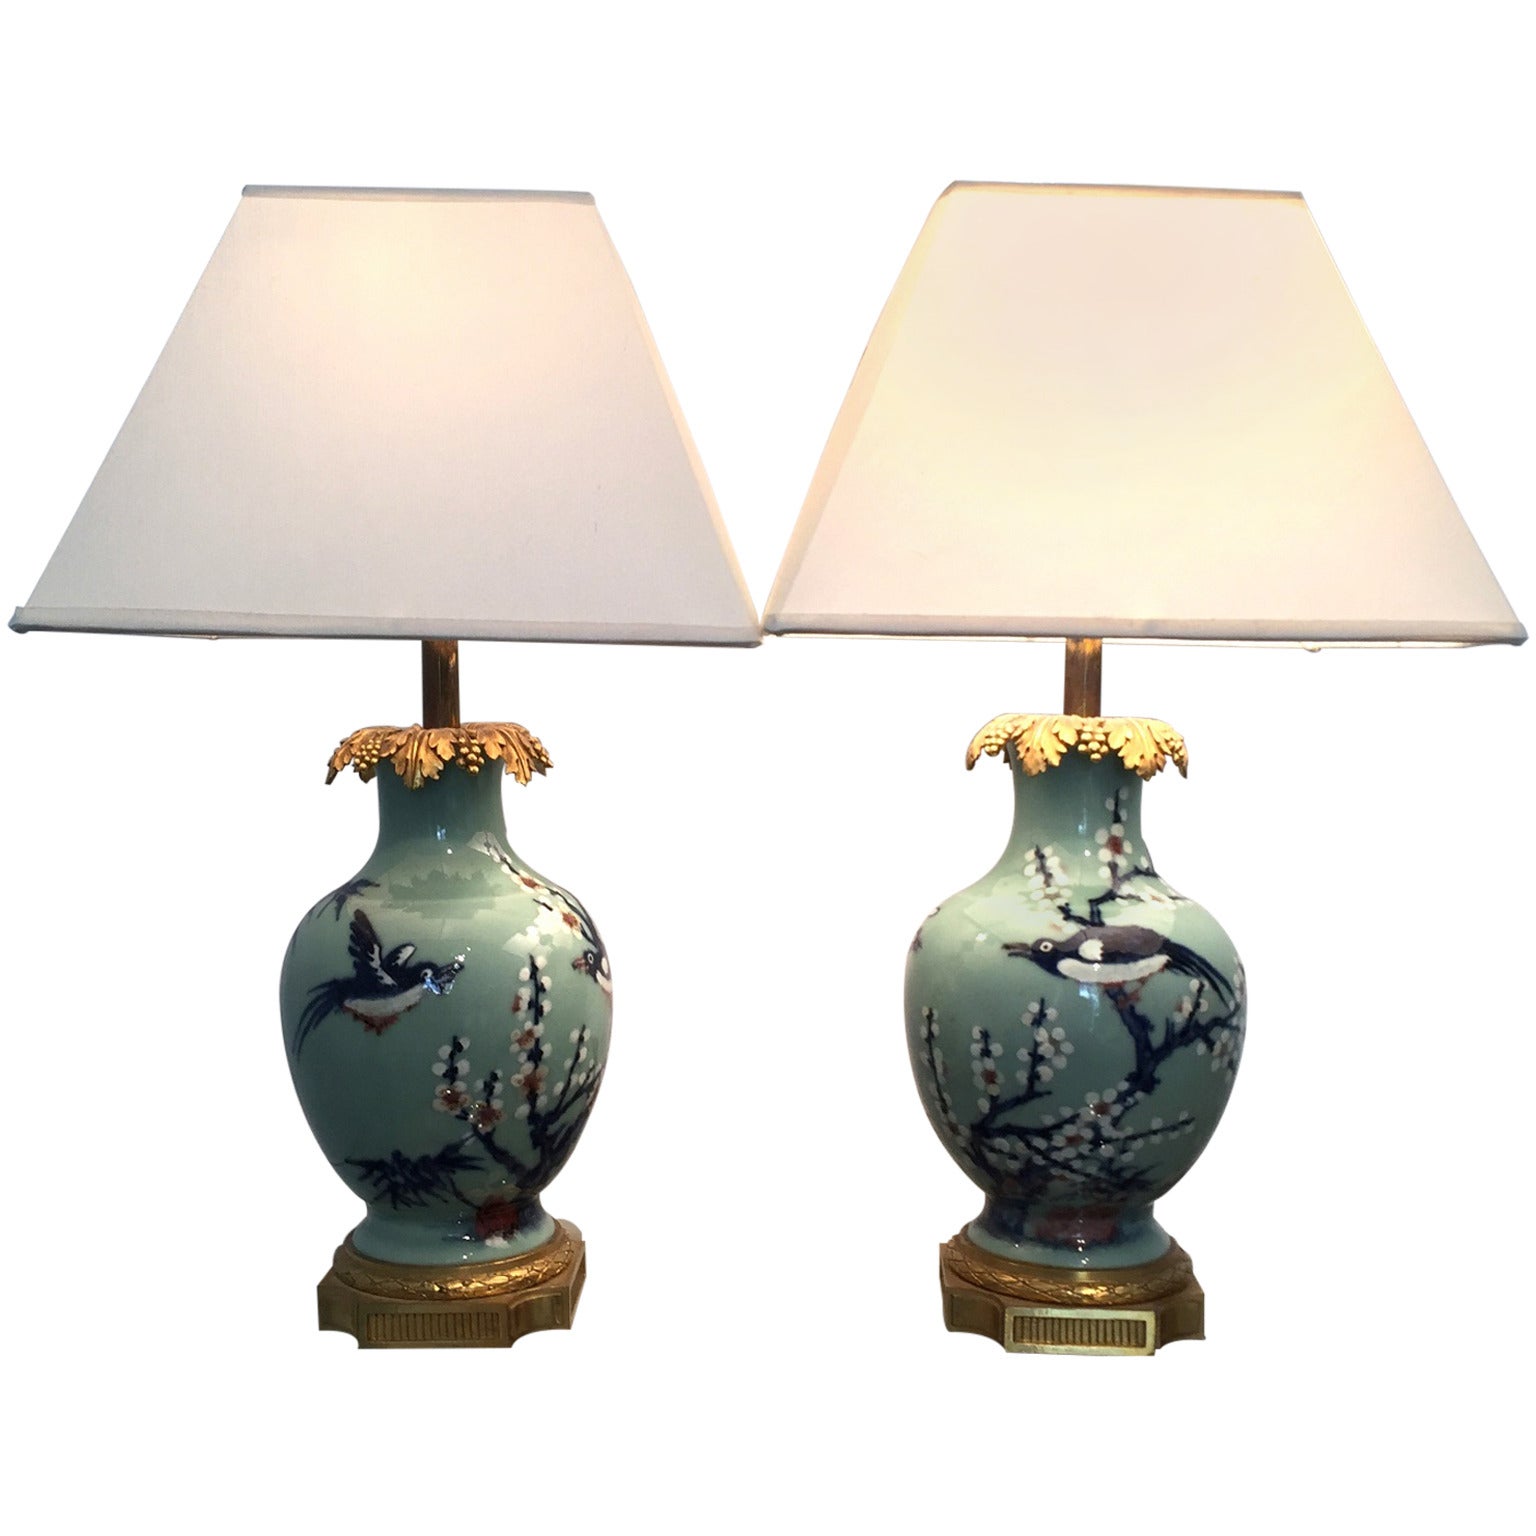 Pair of Chinese Gilt-Mounted Lamps